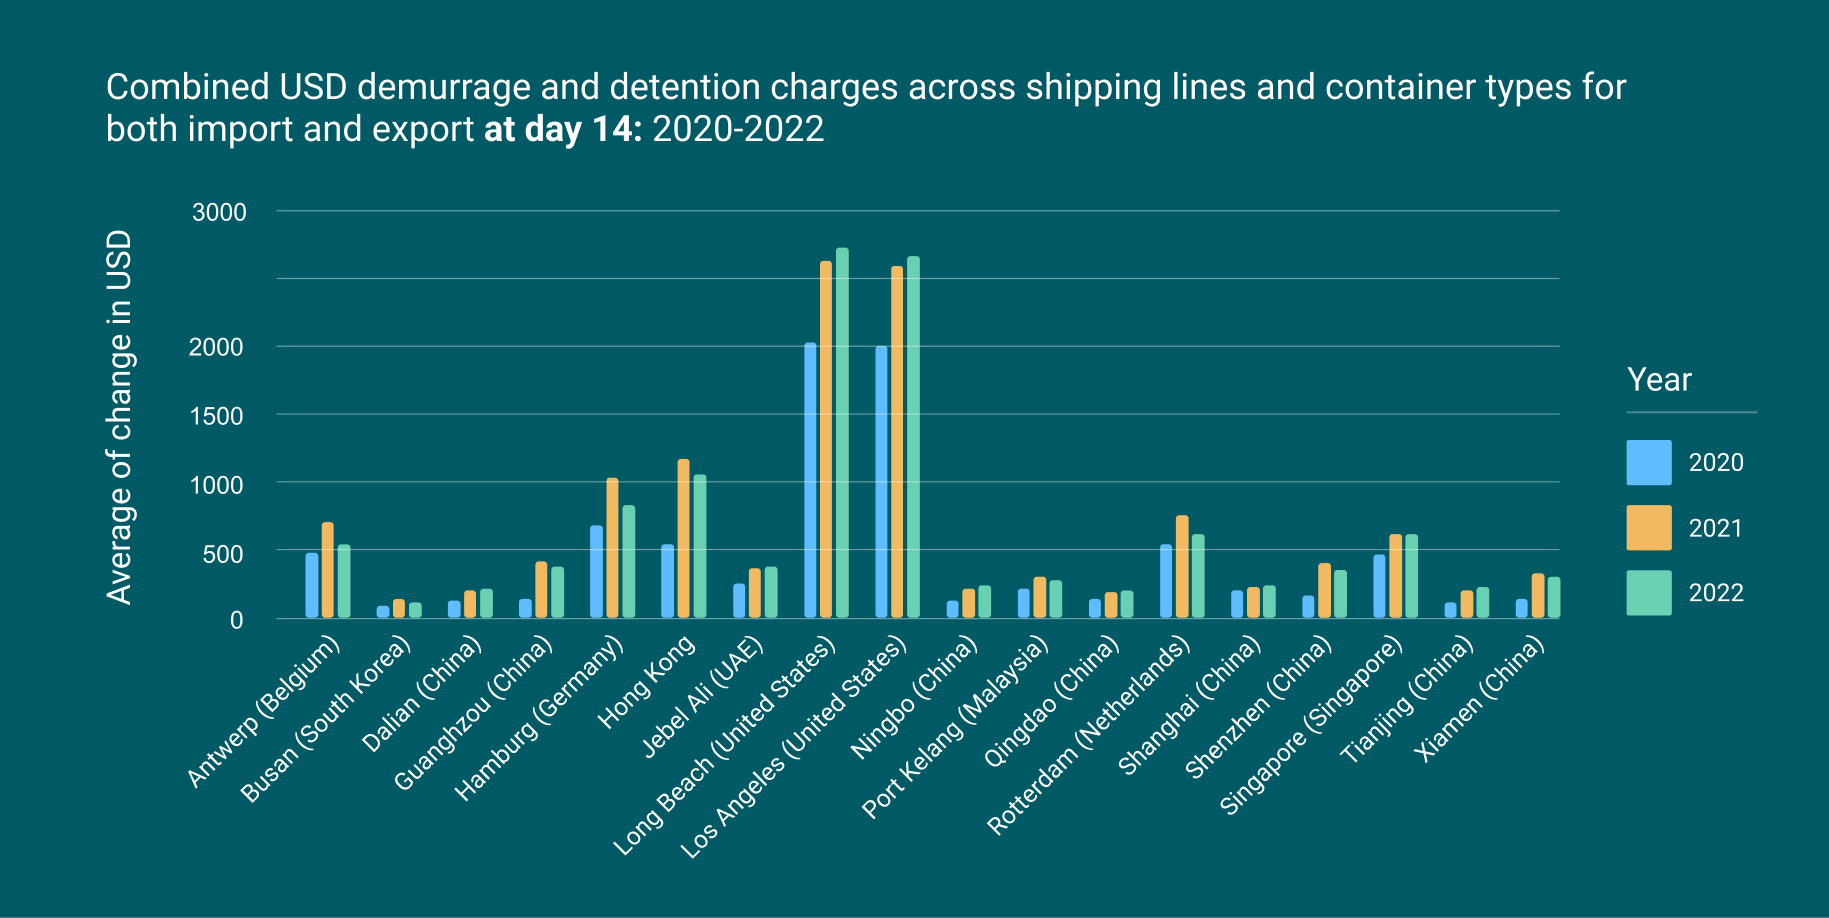 Demurrage and detention fees charges from 2020 to 2022